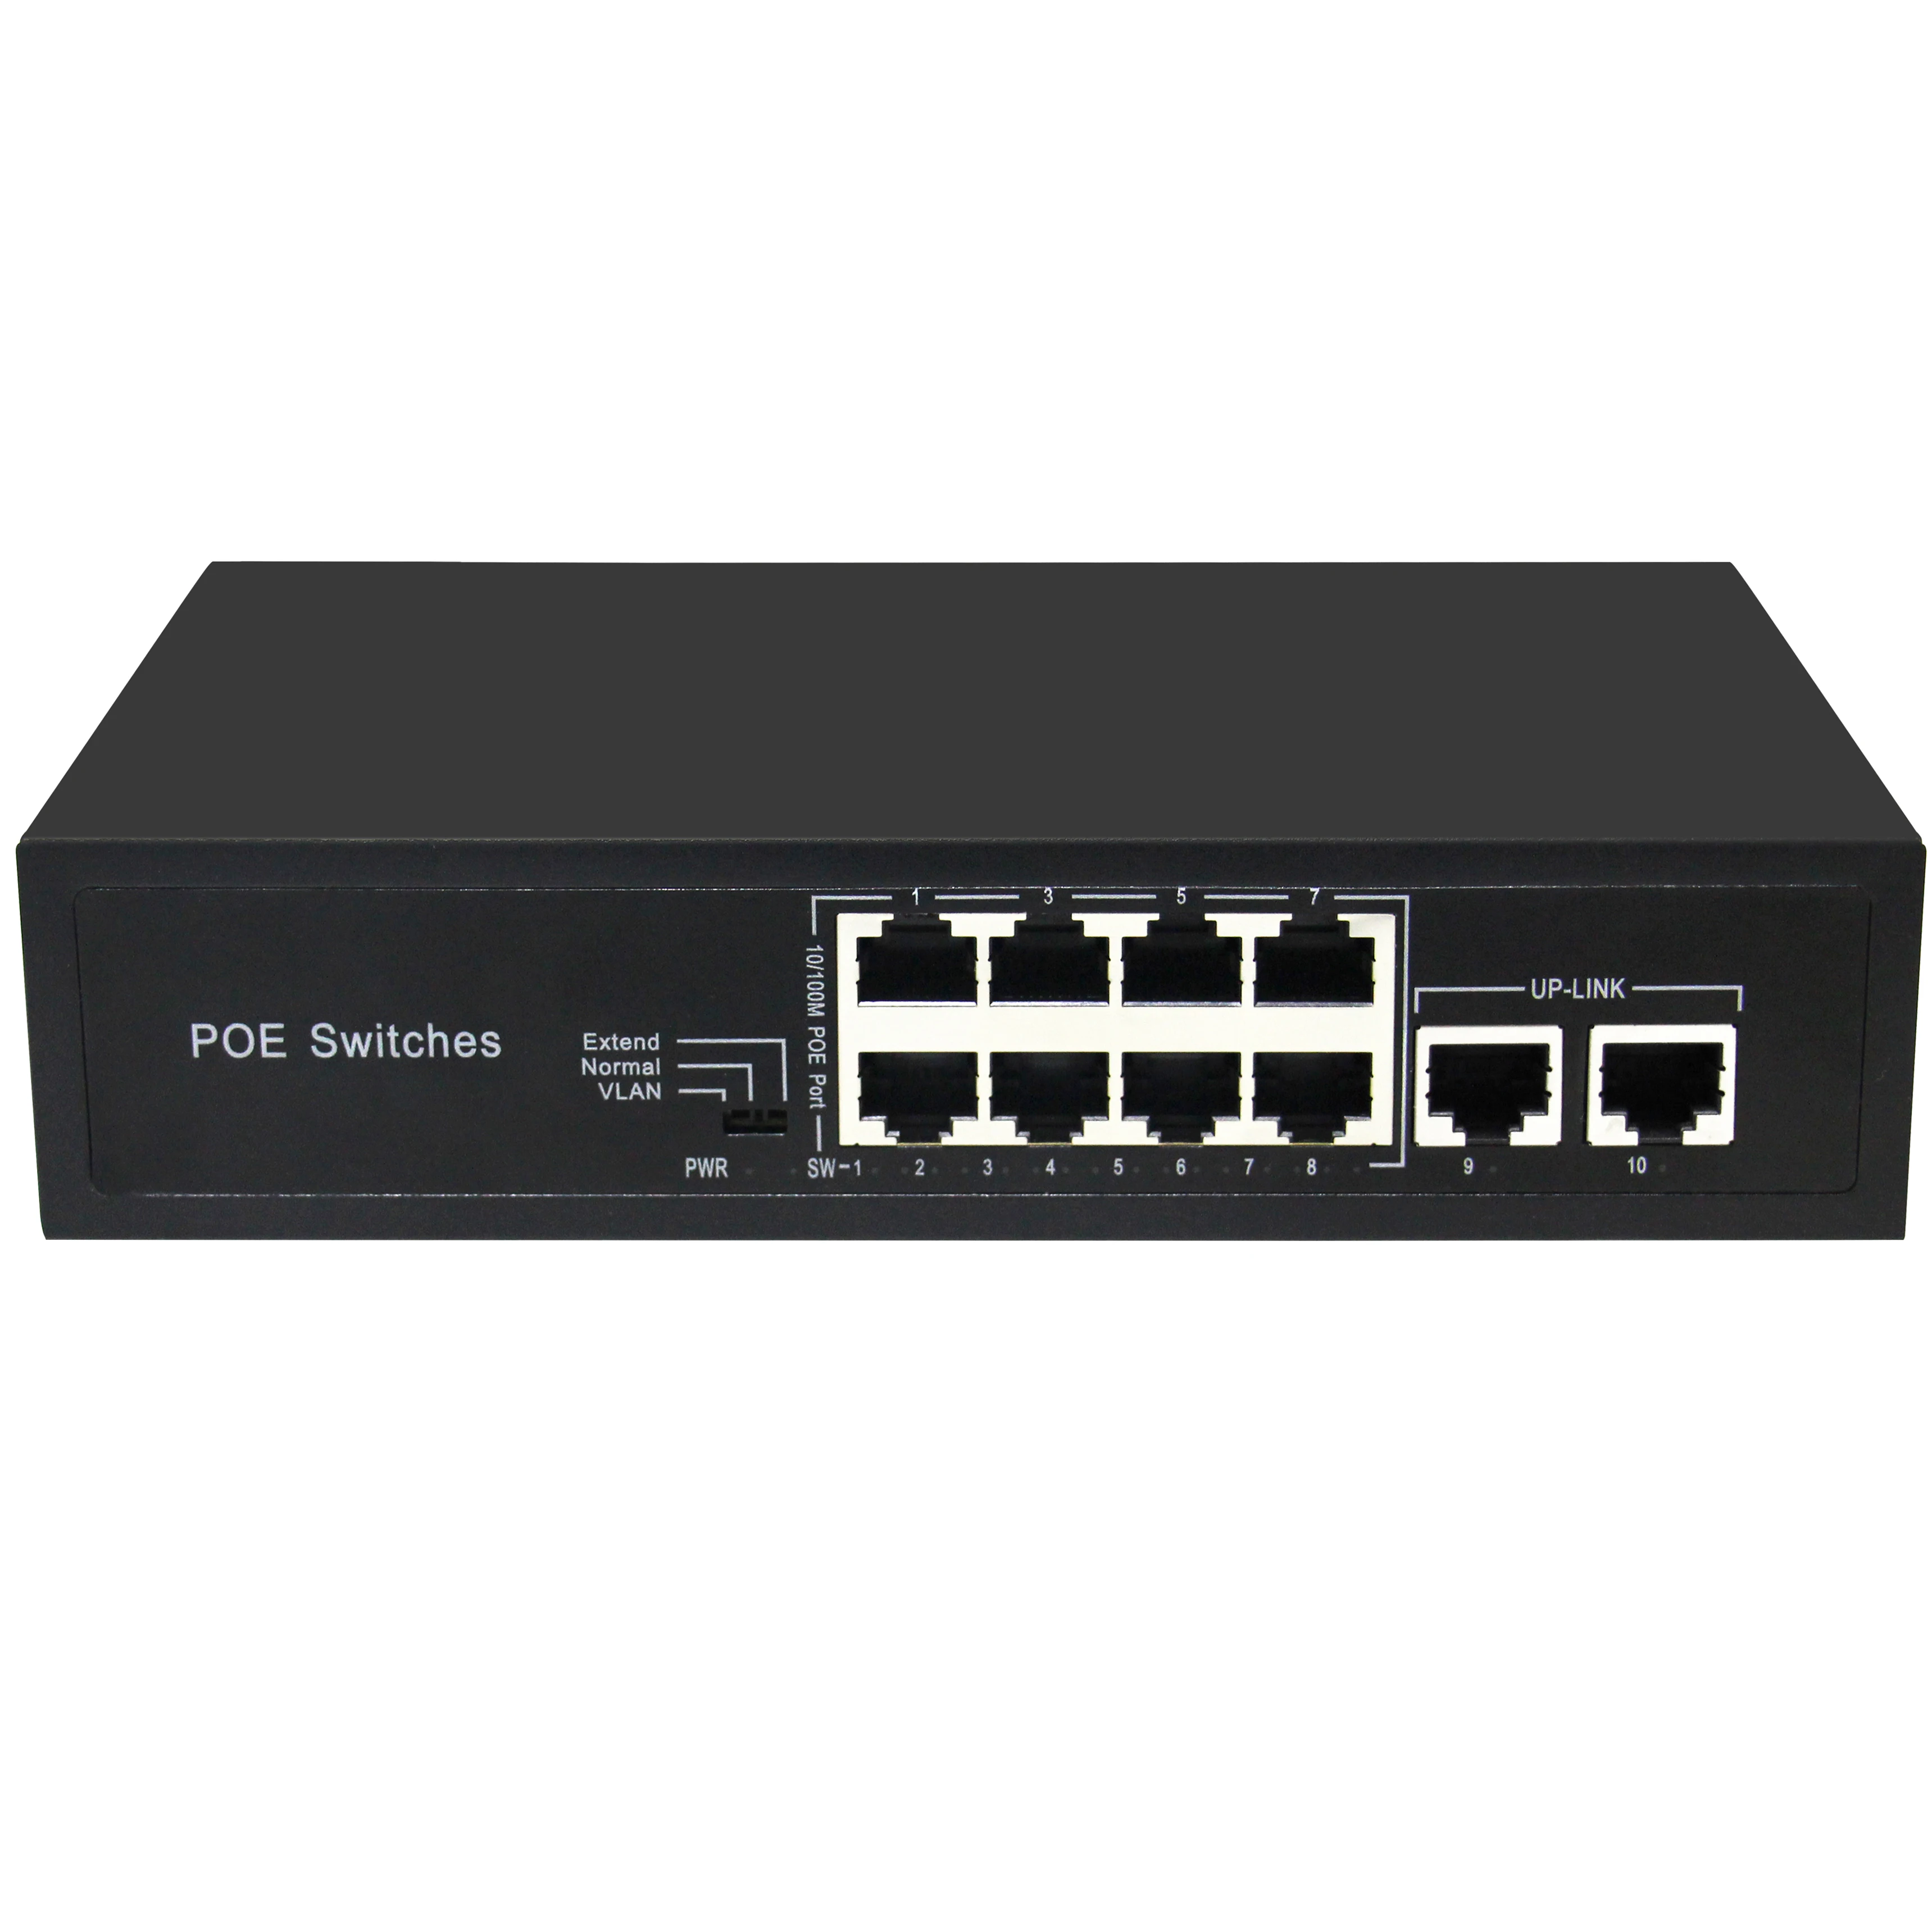 

IEEE802.3af at power over ethernet build power supply 96W 8+2 port poe switch